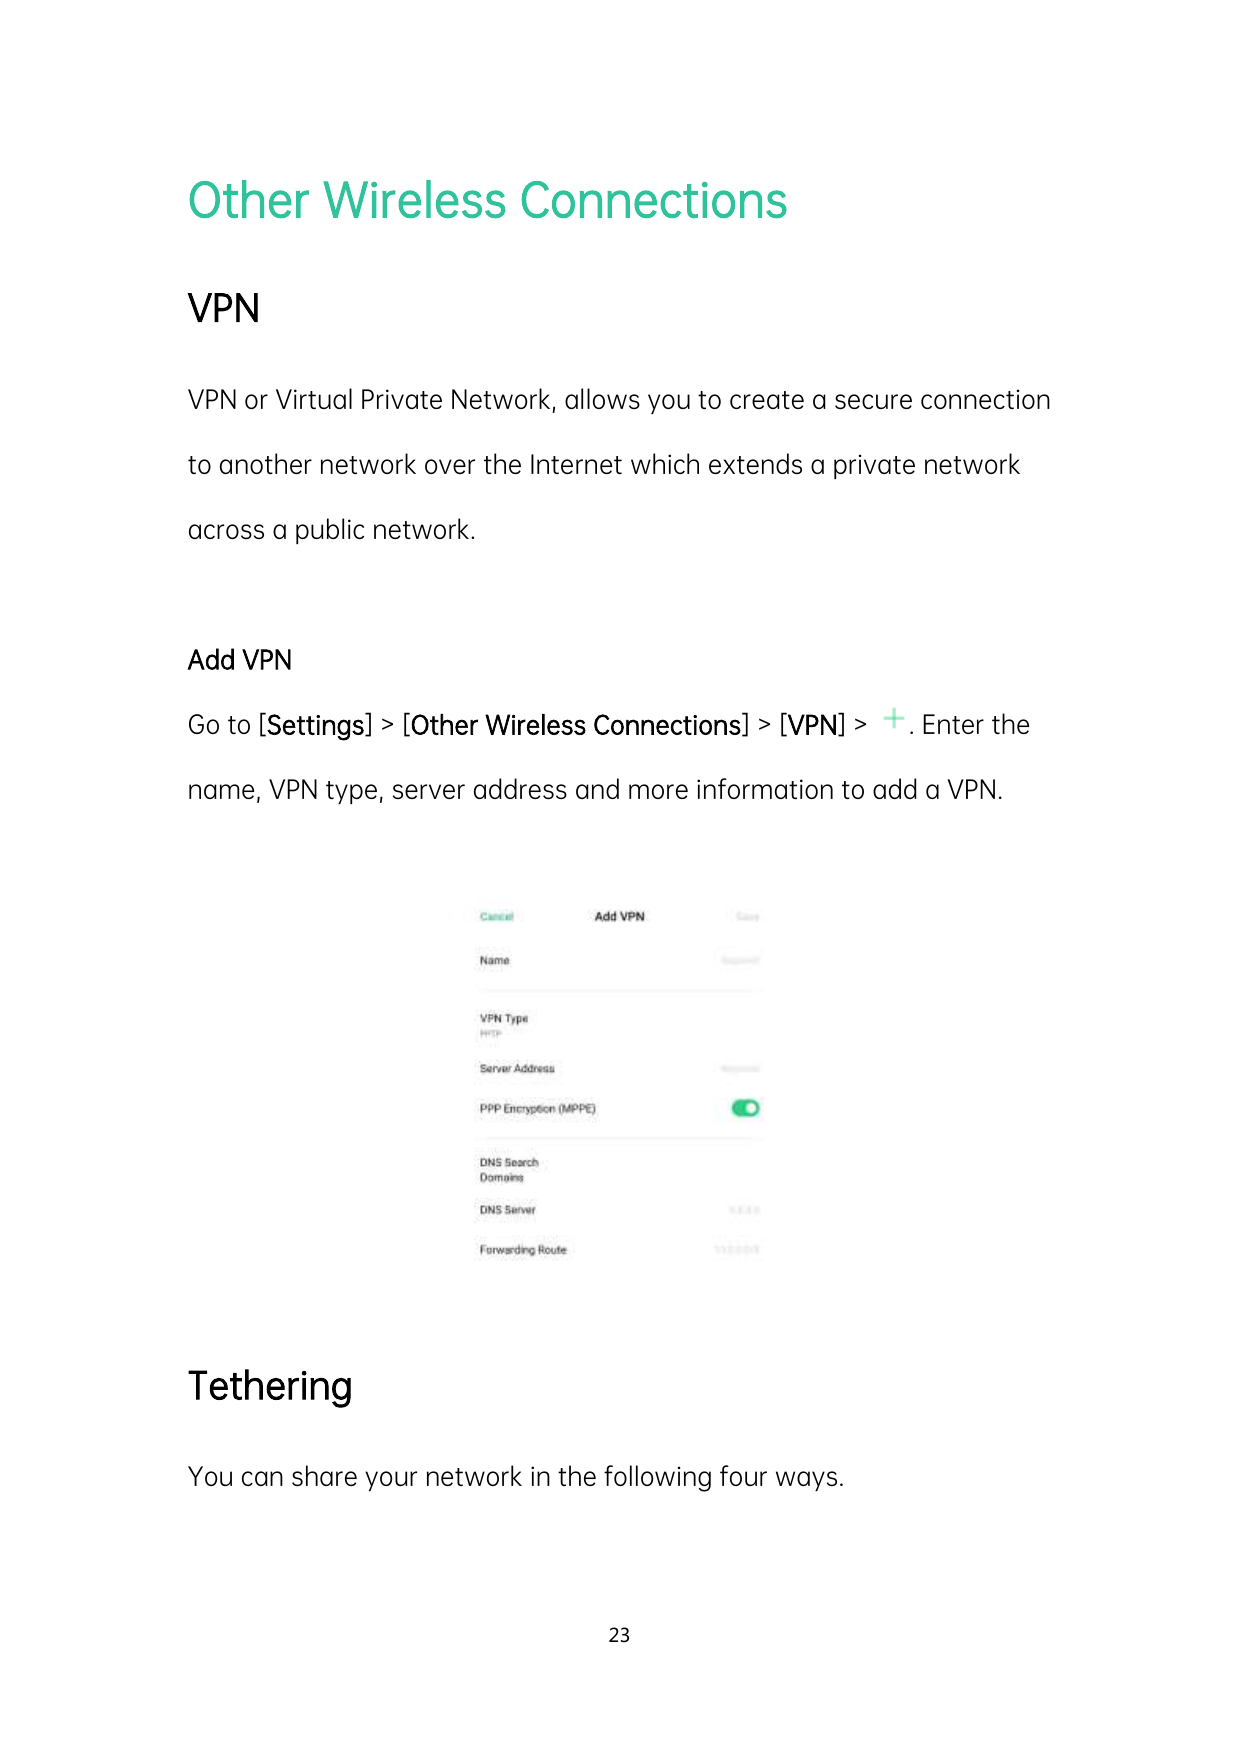 Other Wireless ConnectionsVPNVPN or Virtual Private Network, allows you to create a secure connectionto another network over the